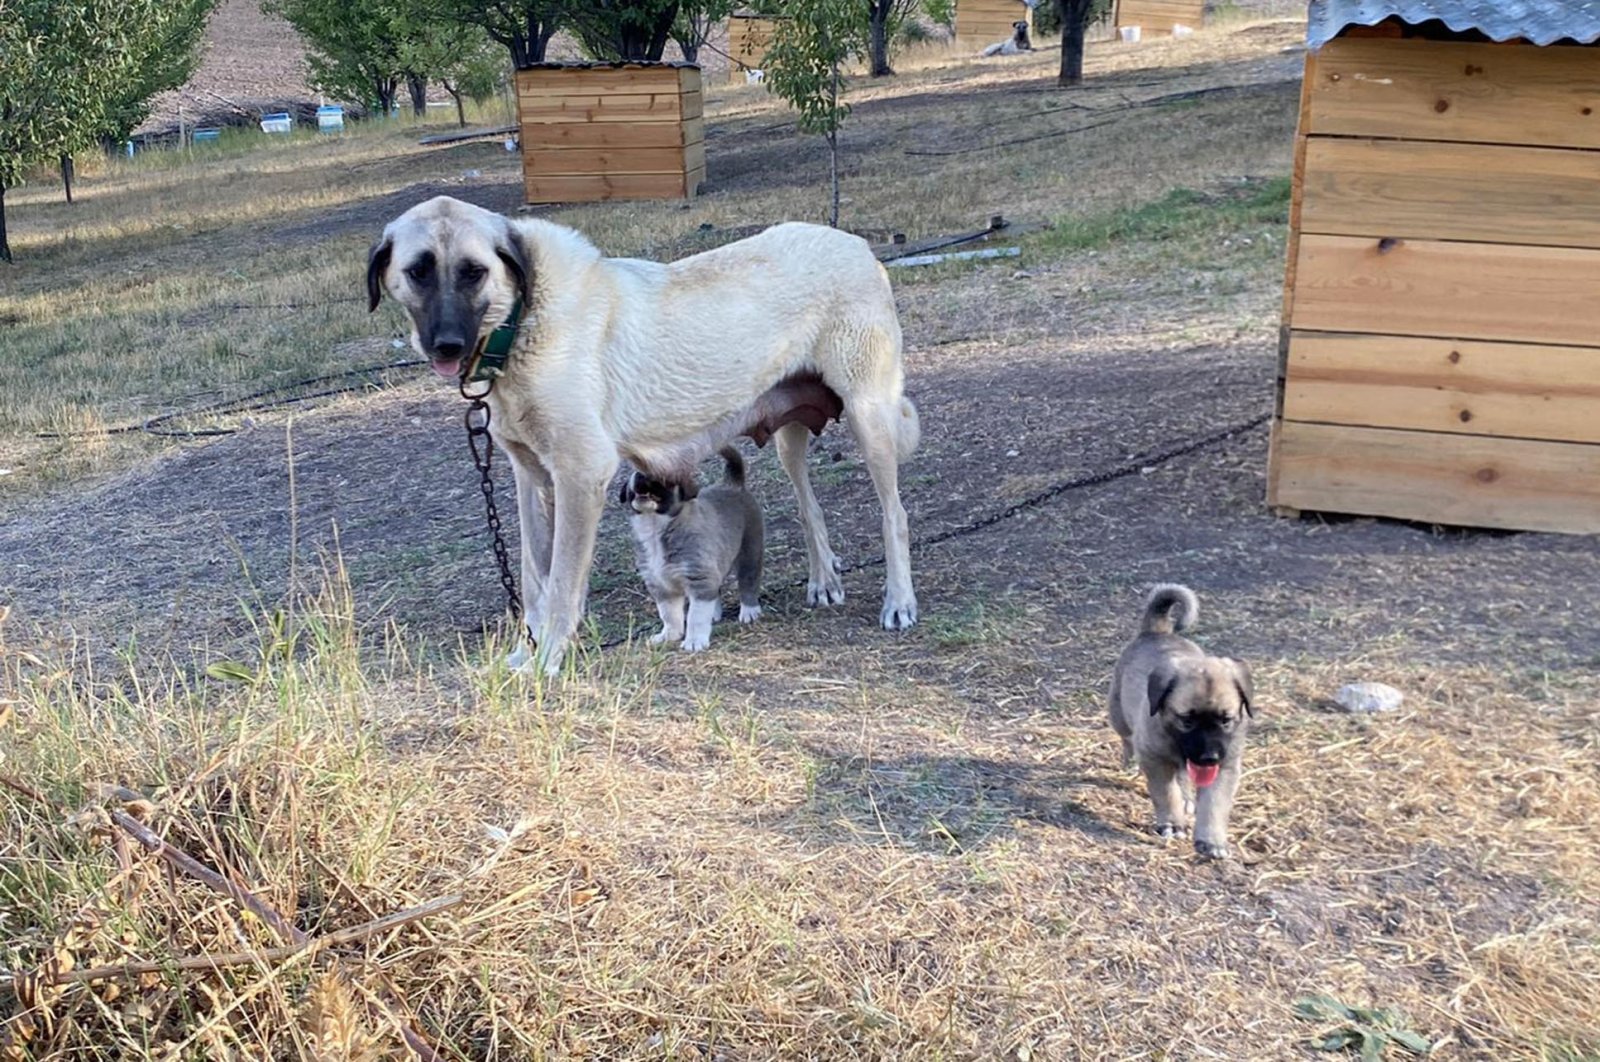 A Kangal dog nurses her puppy while another puppy plays nearby, in Sivas, central Turkey, Sept. 2, 2020. (DHA Photo)